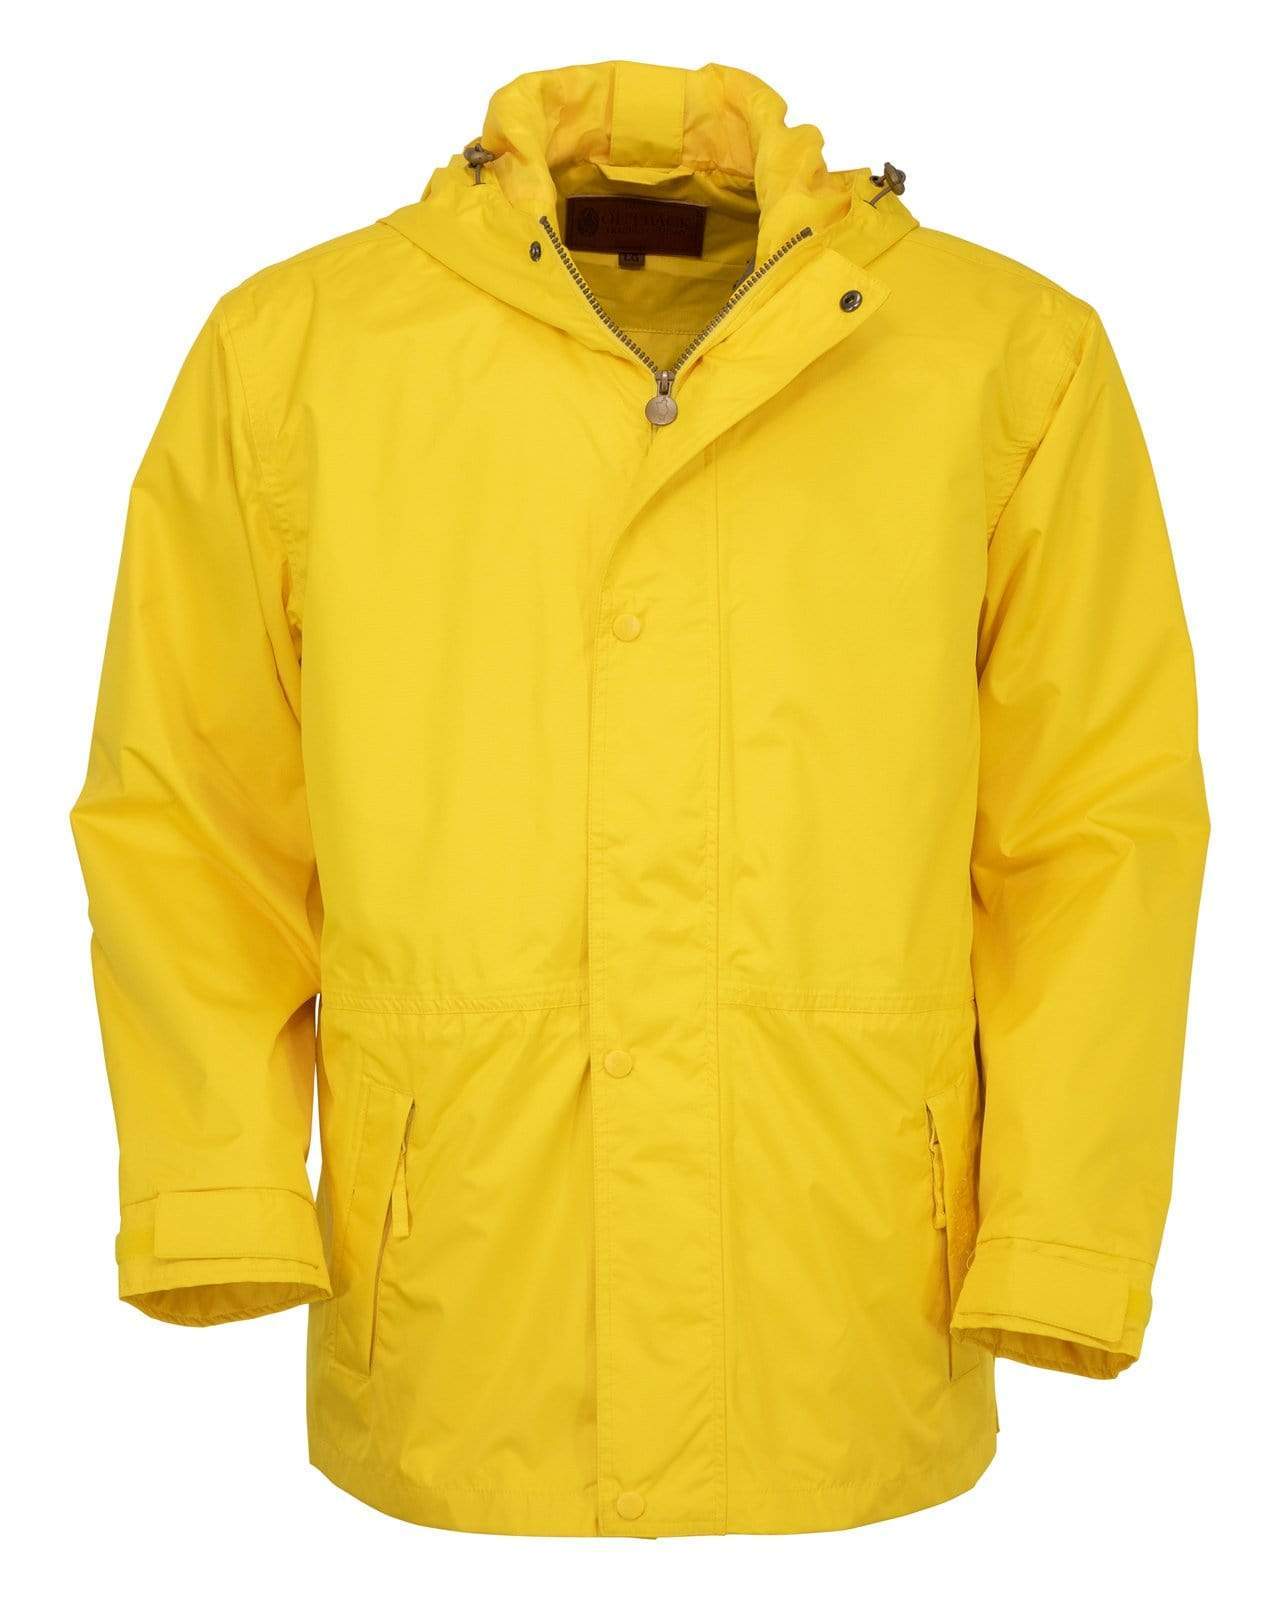 Mens Waterproof Jackets - Outback Trading Company – OutbackTrading.com